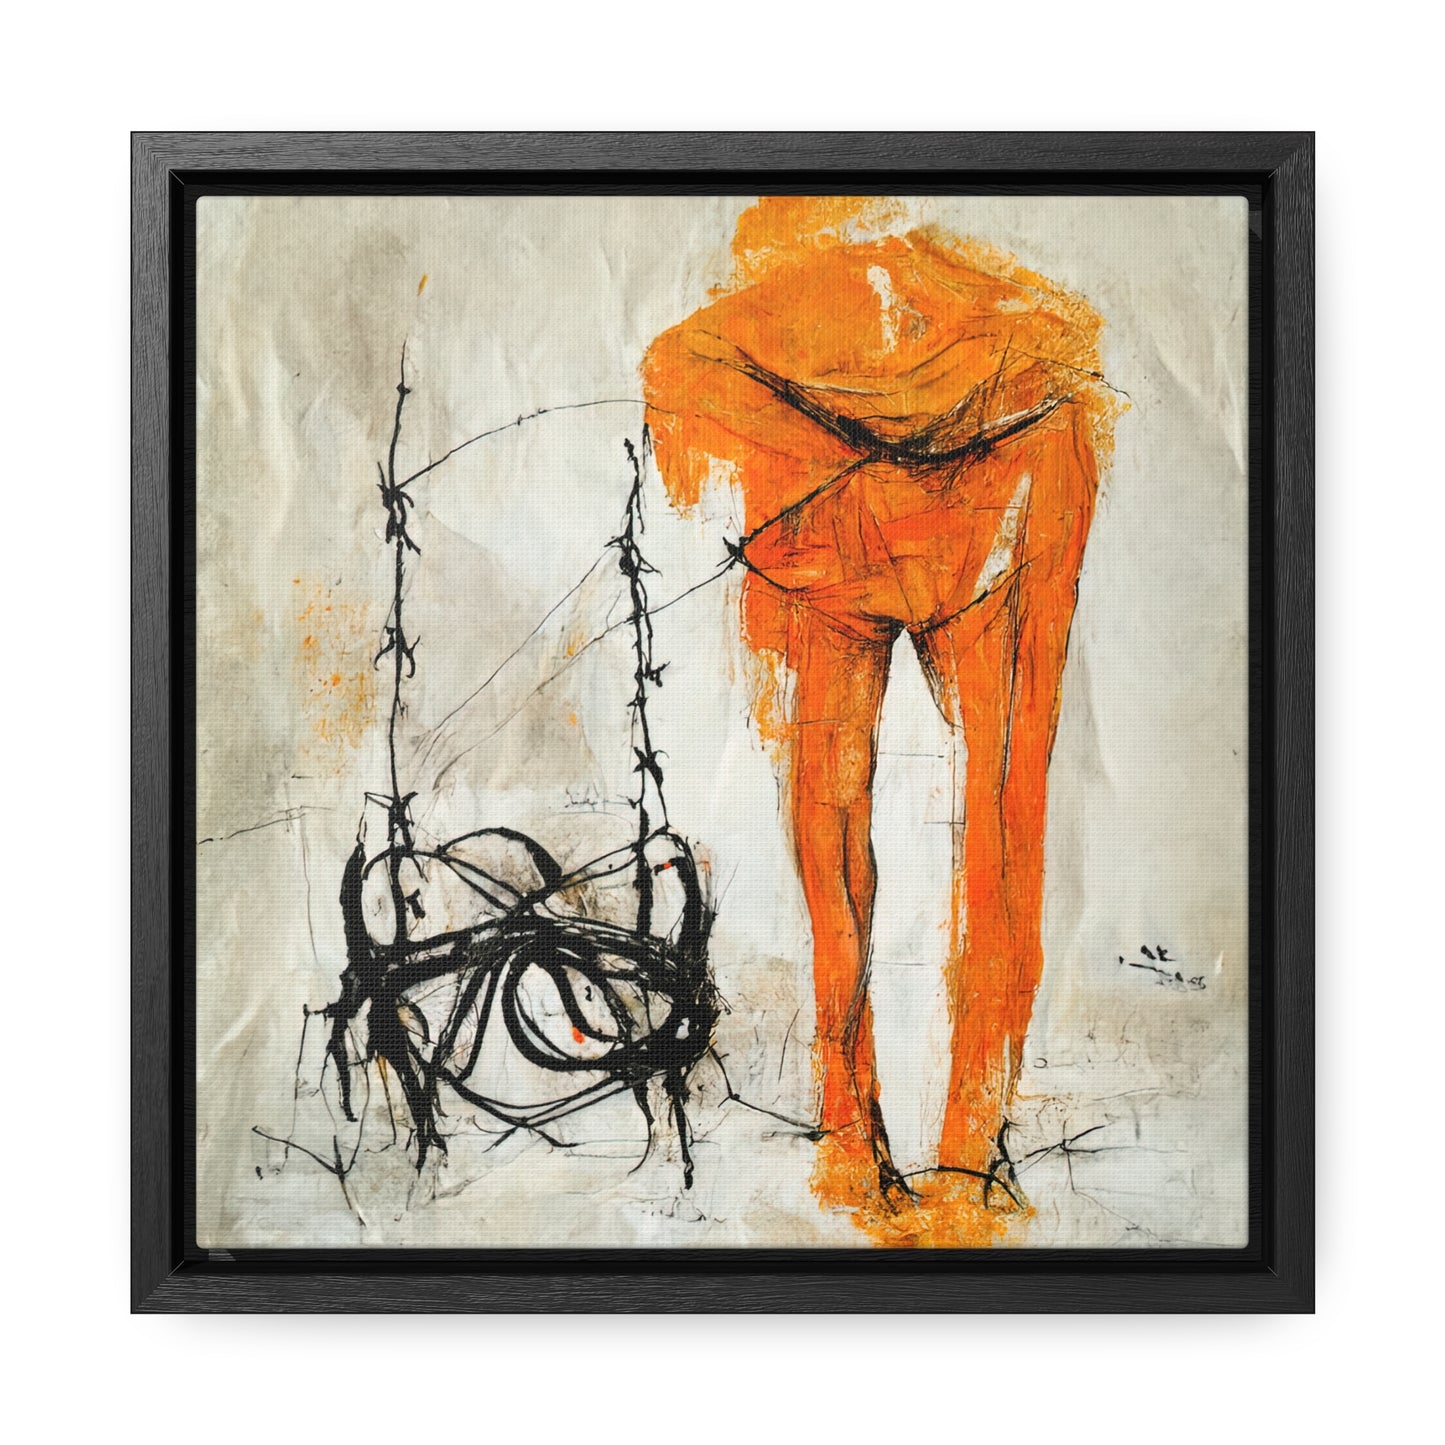 Feet and Drama 17, Valentinii, Gallery Canvas Wraps, Square Frame